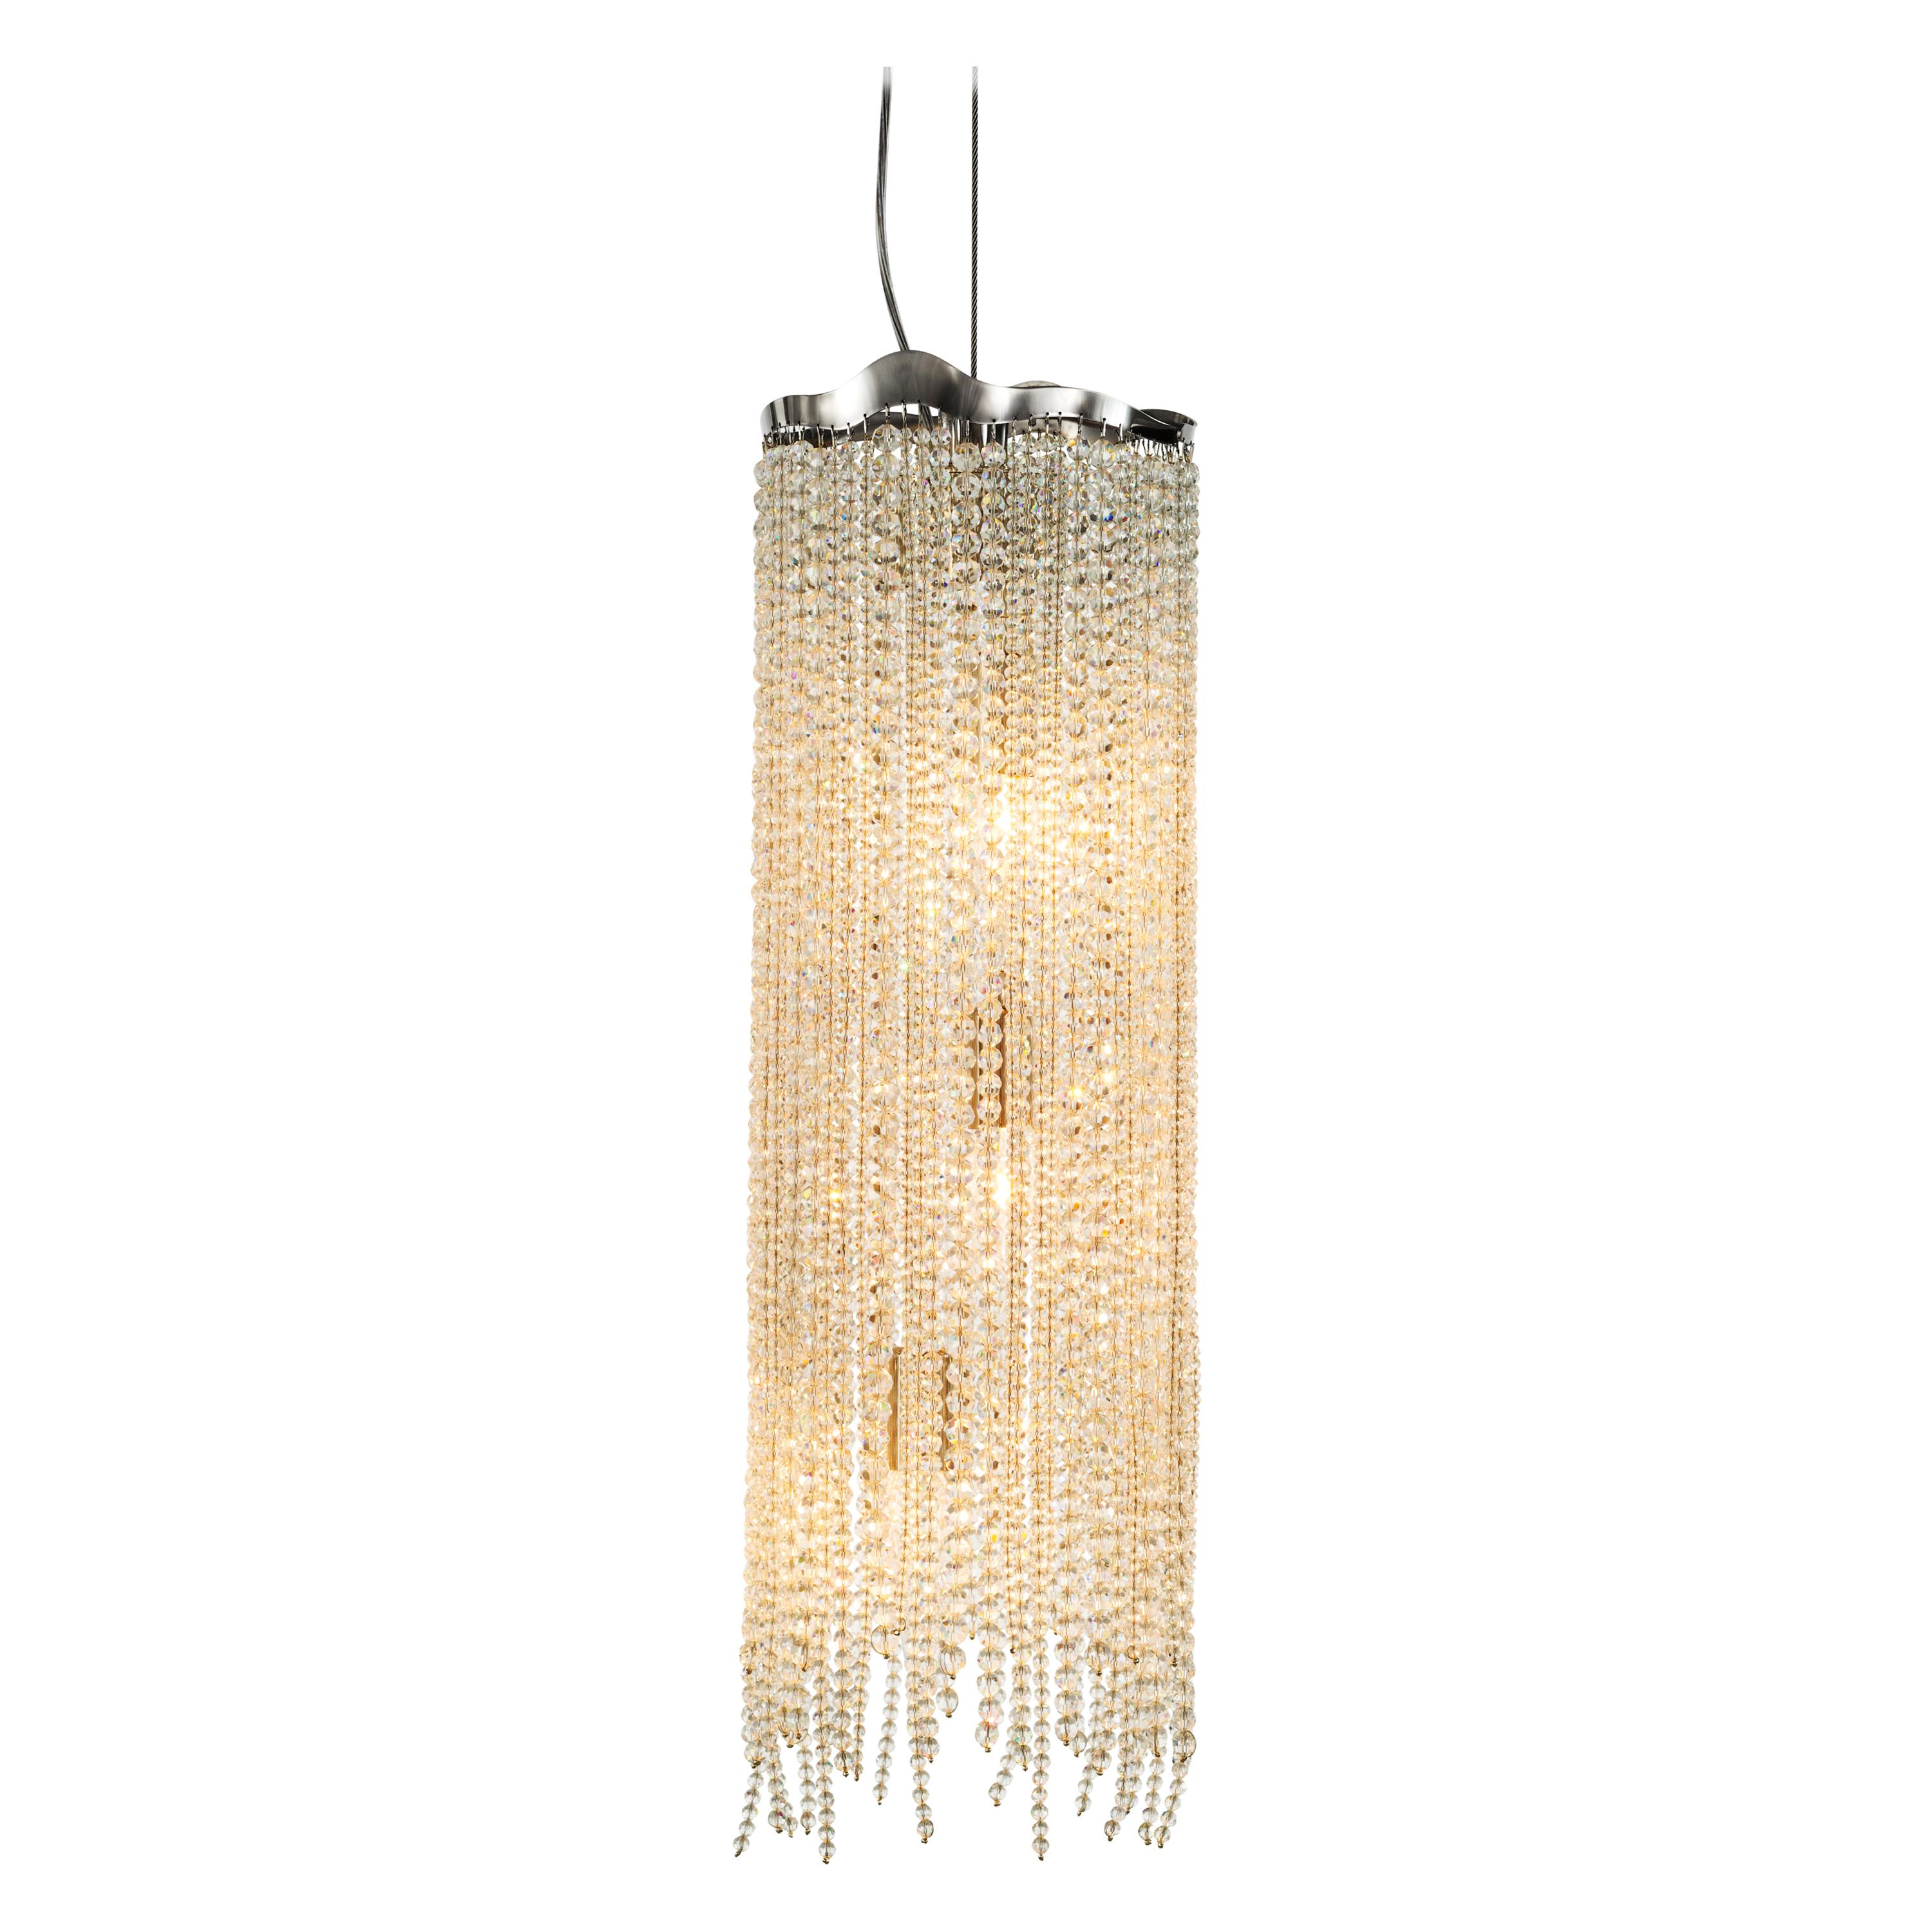 Modern Pendant in a Nickel Finish with Crystals, Victoria Collection, by Brand